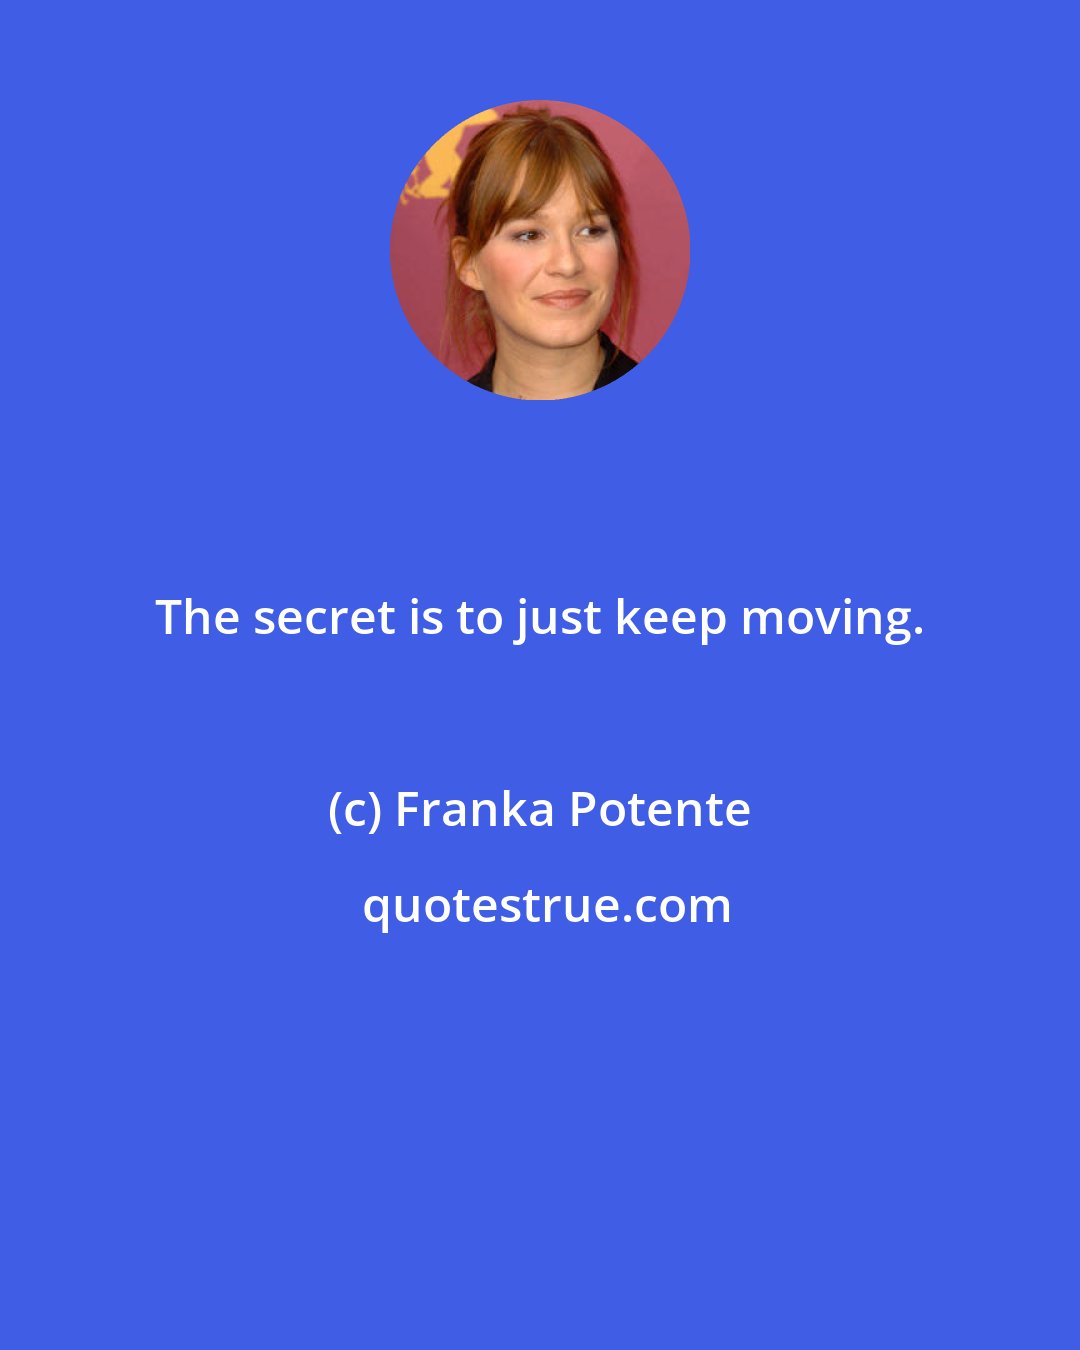 Franka Potente: The secret is to just keep moving.